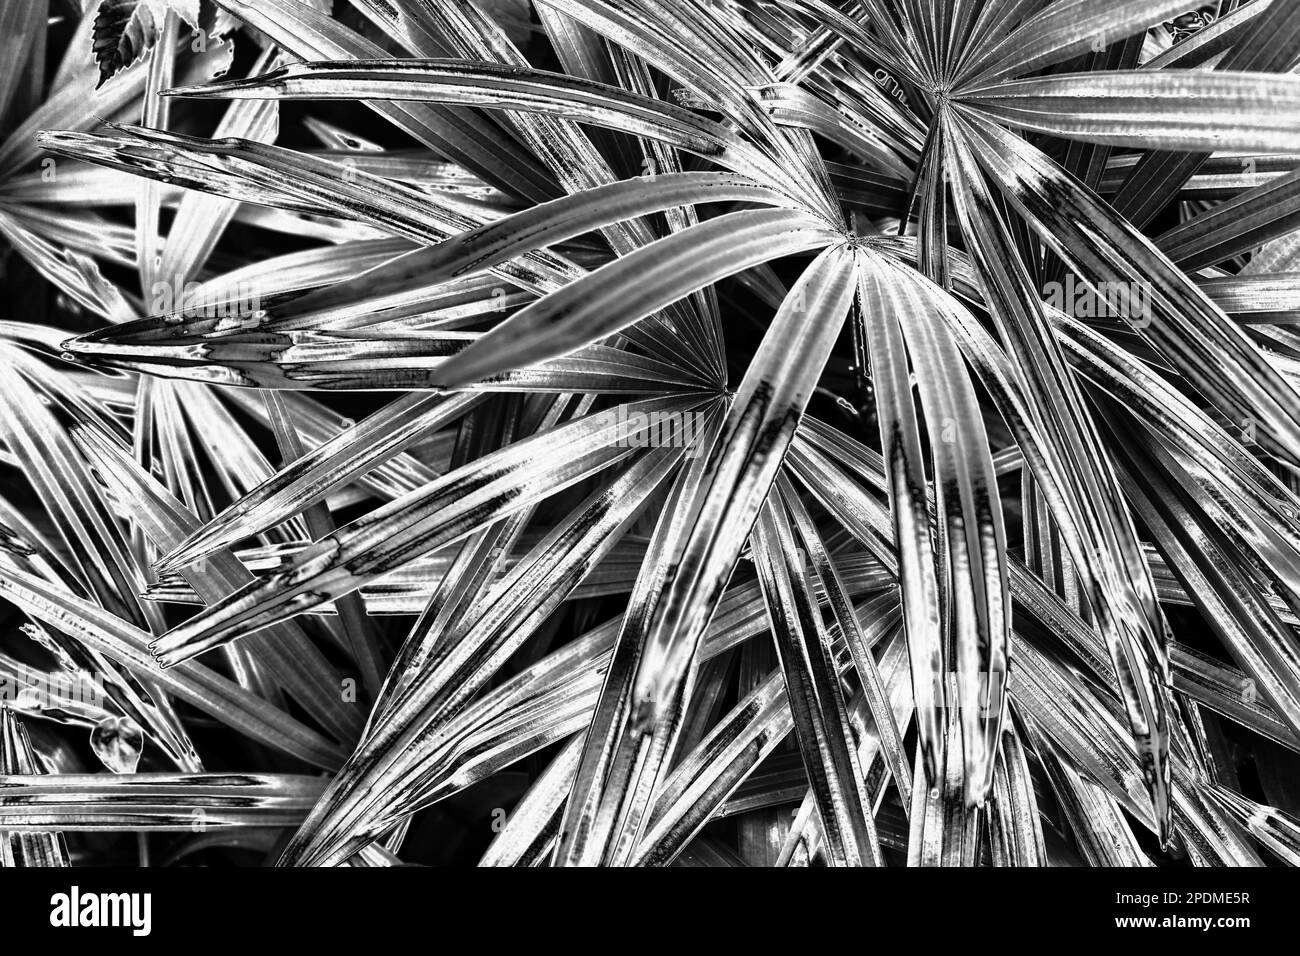 Silver palm tree leaves background, silver flower leaf texture, gray metal tropical foliage backdrop, black white metallic floral branch pattern Stock Photo